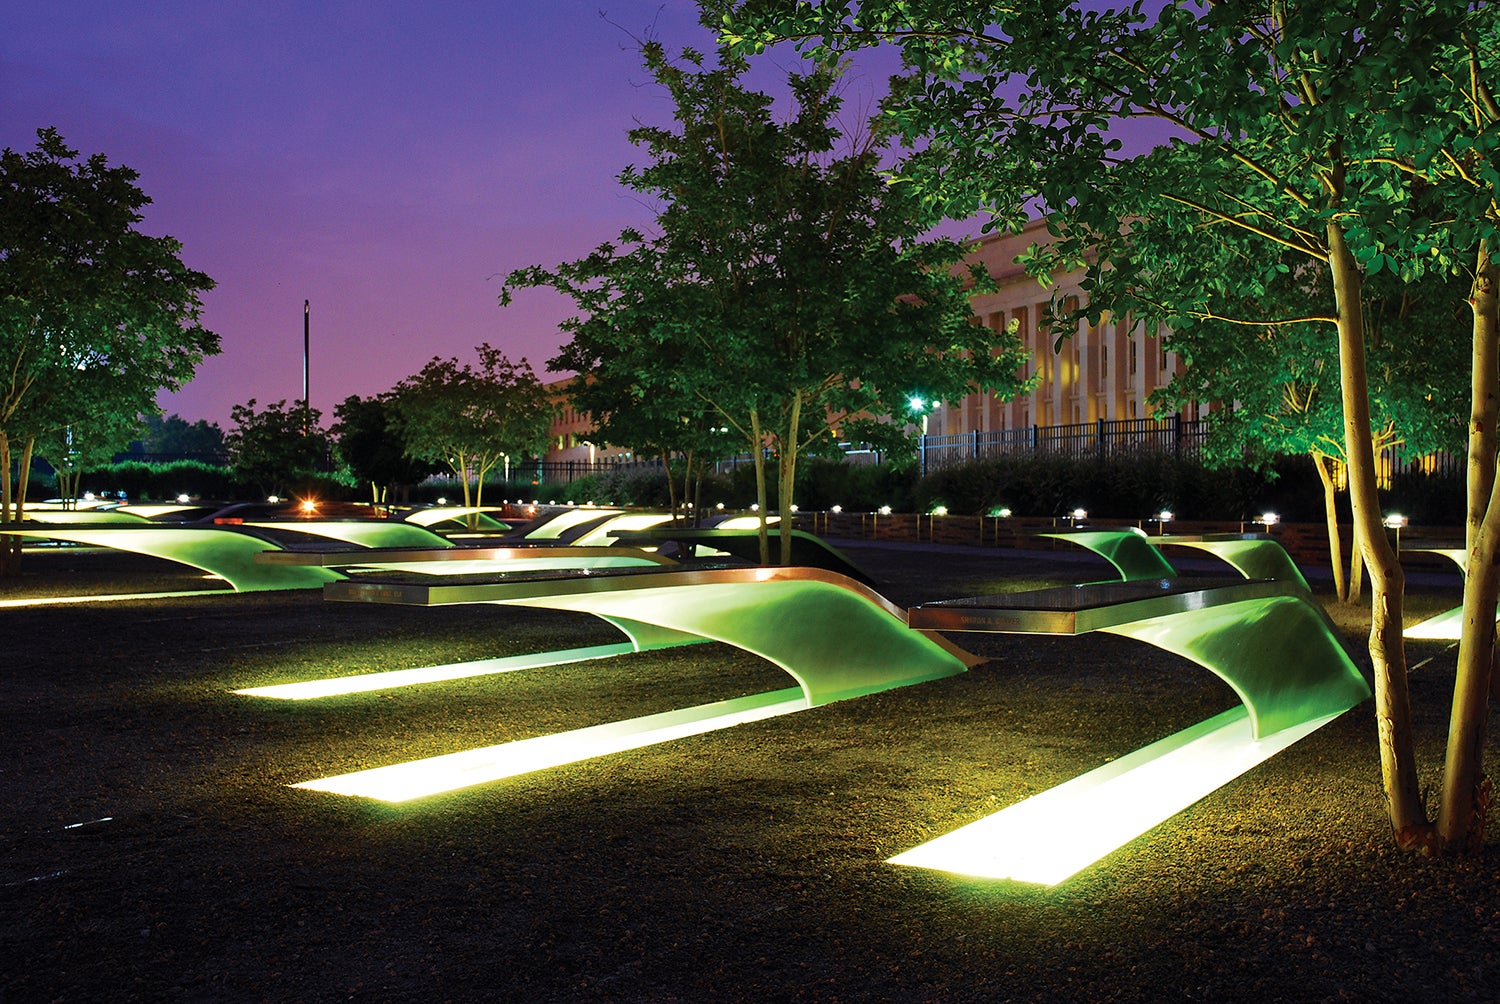 Lighted benches are part of the memorial commemorating lives lost at the Pentagon and aboard Flight 77 during the Sept. 11, 2001, terrorist attacks.